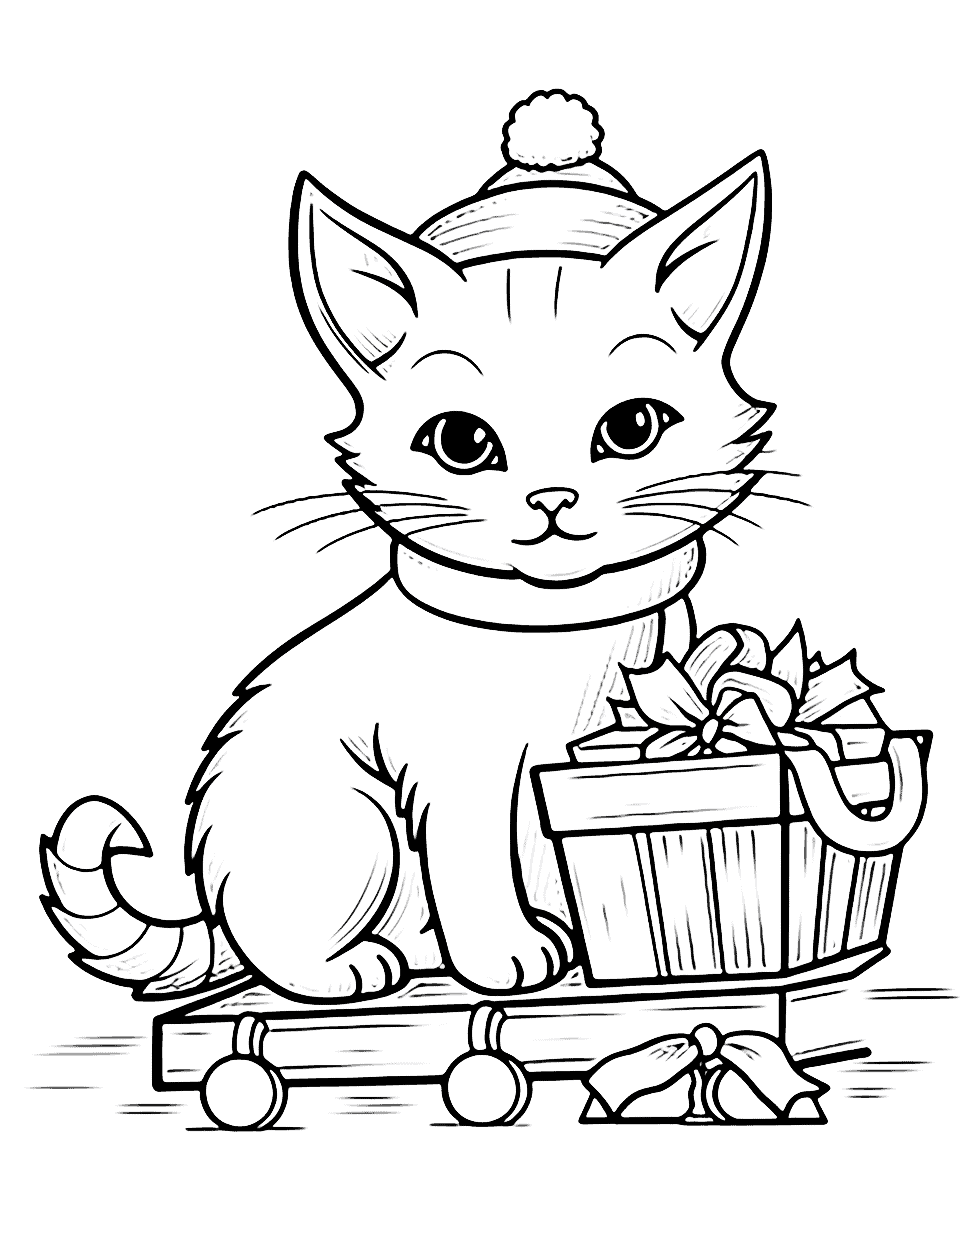 Christmas Cat With a Sleigh of Presents Coloring Page - A cat pulling a sleigh full of presents in a Christmas scene.